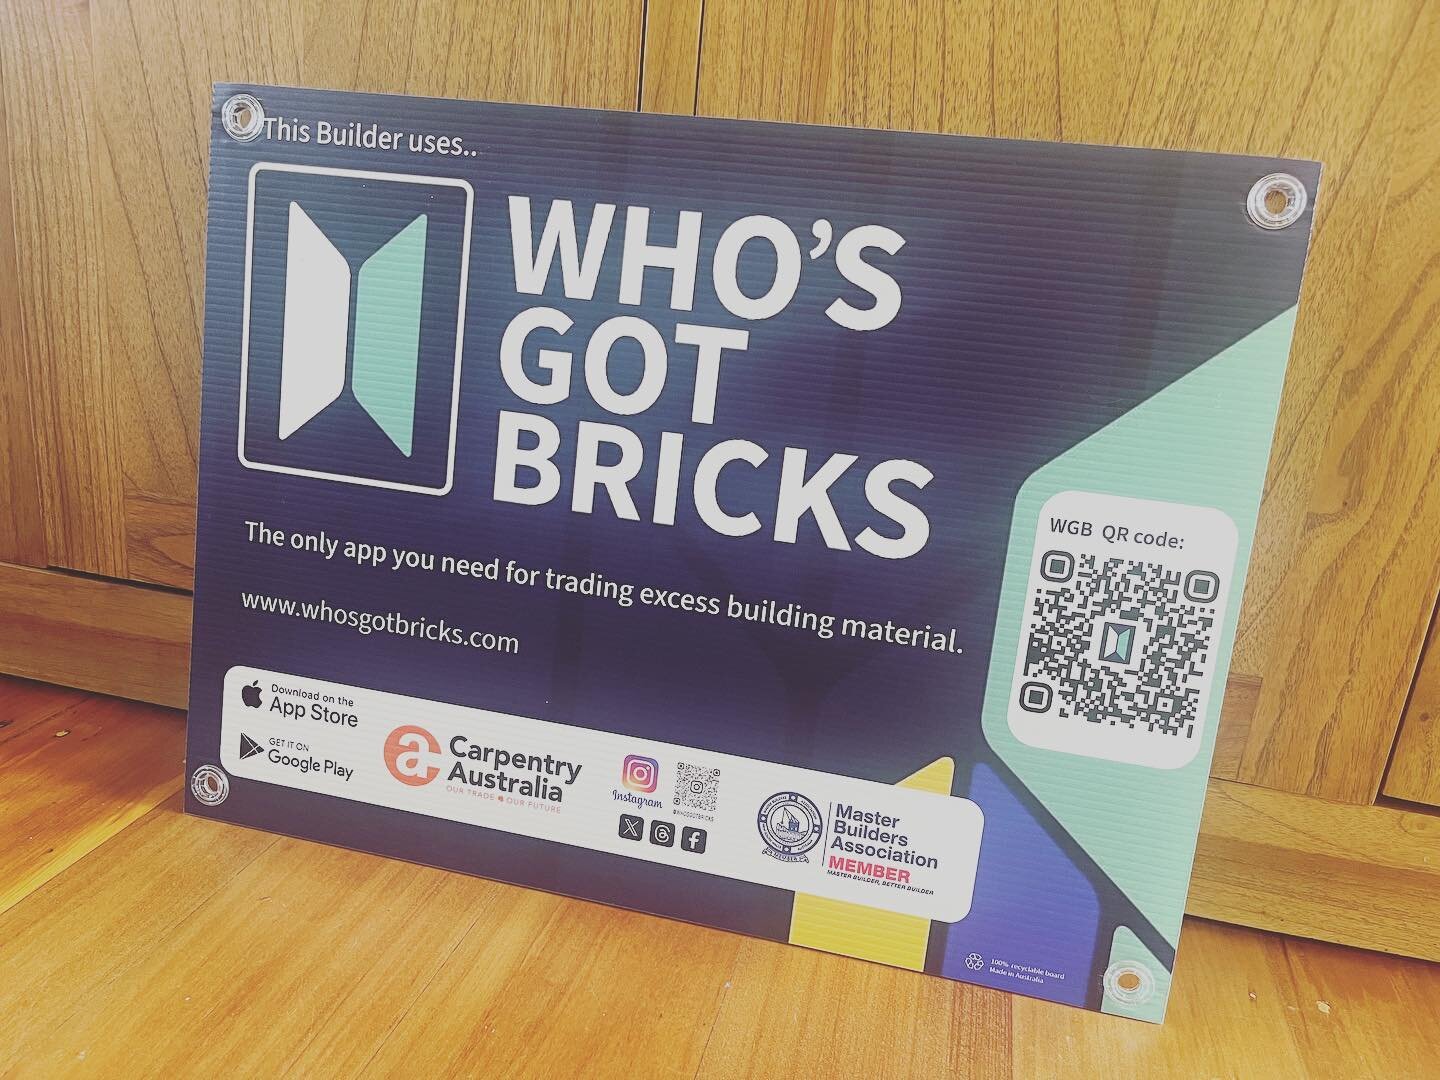 // WHO&rsquo;S GOT BRICKS // Super excited to be taking part in a pilot for @whosgotbricks 
An Australian Start Up creating a market place for builders and renovators to buy and sell excess or reclaimed materials, reducing waste and saving money for 